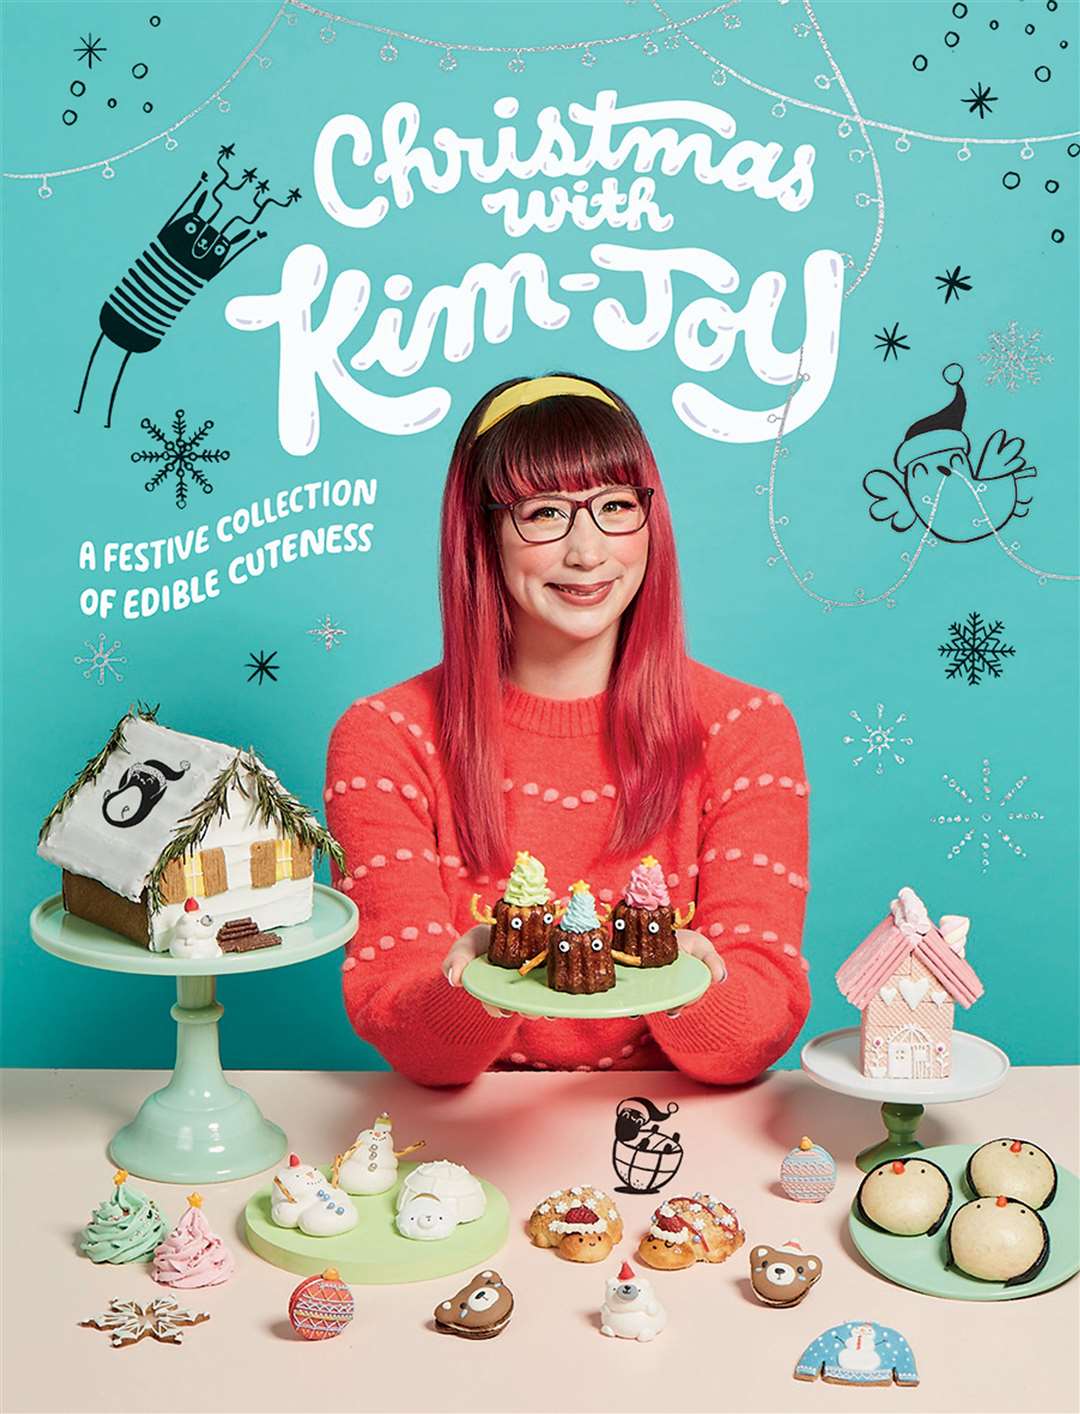 Christmas With Kim-Joy: A Festive Collection of Edible Cuteness by Kim-Joy is published by Quadrille, priced £15. Photography by Ellis Parrinder. Available now